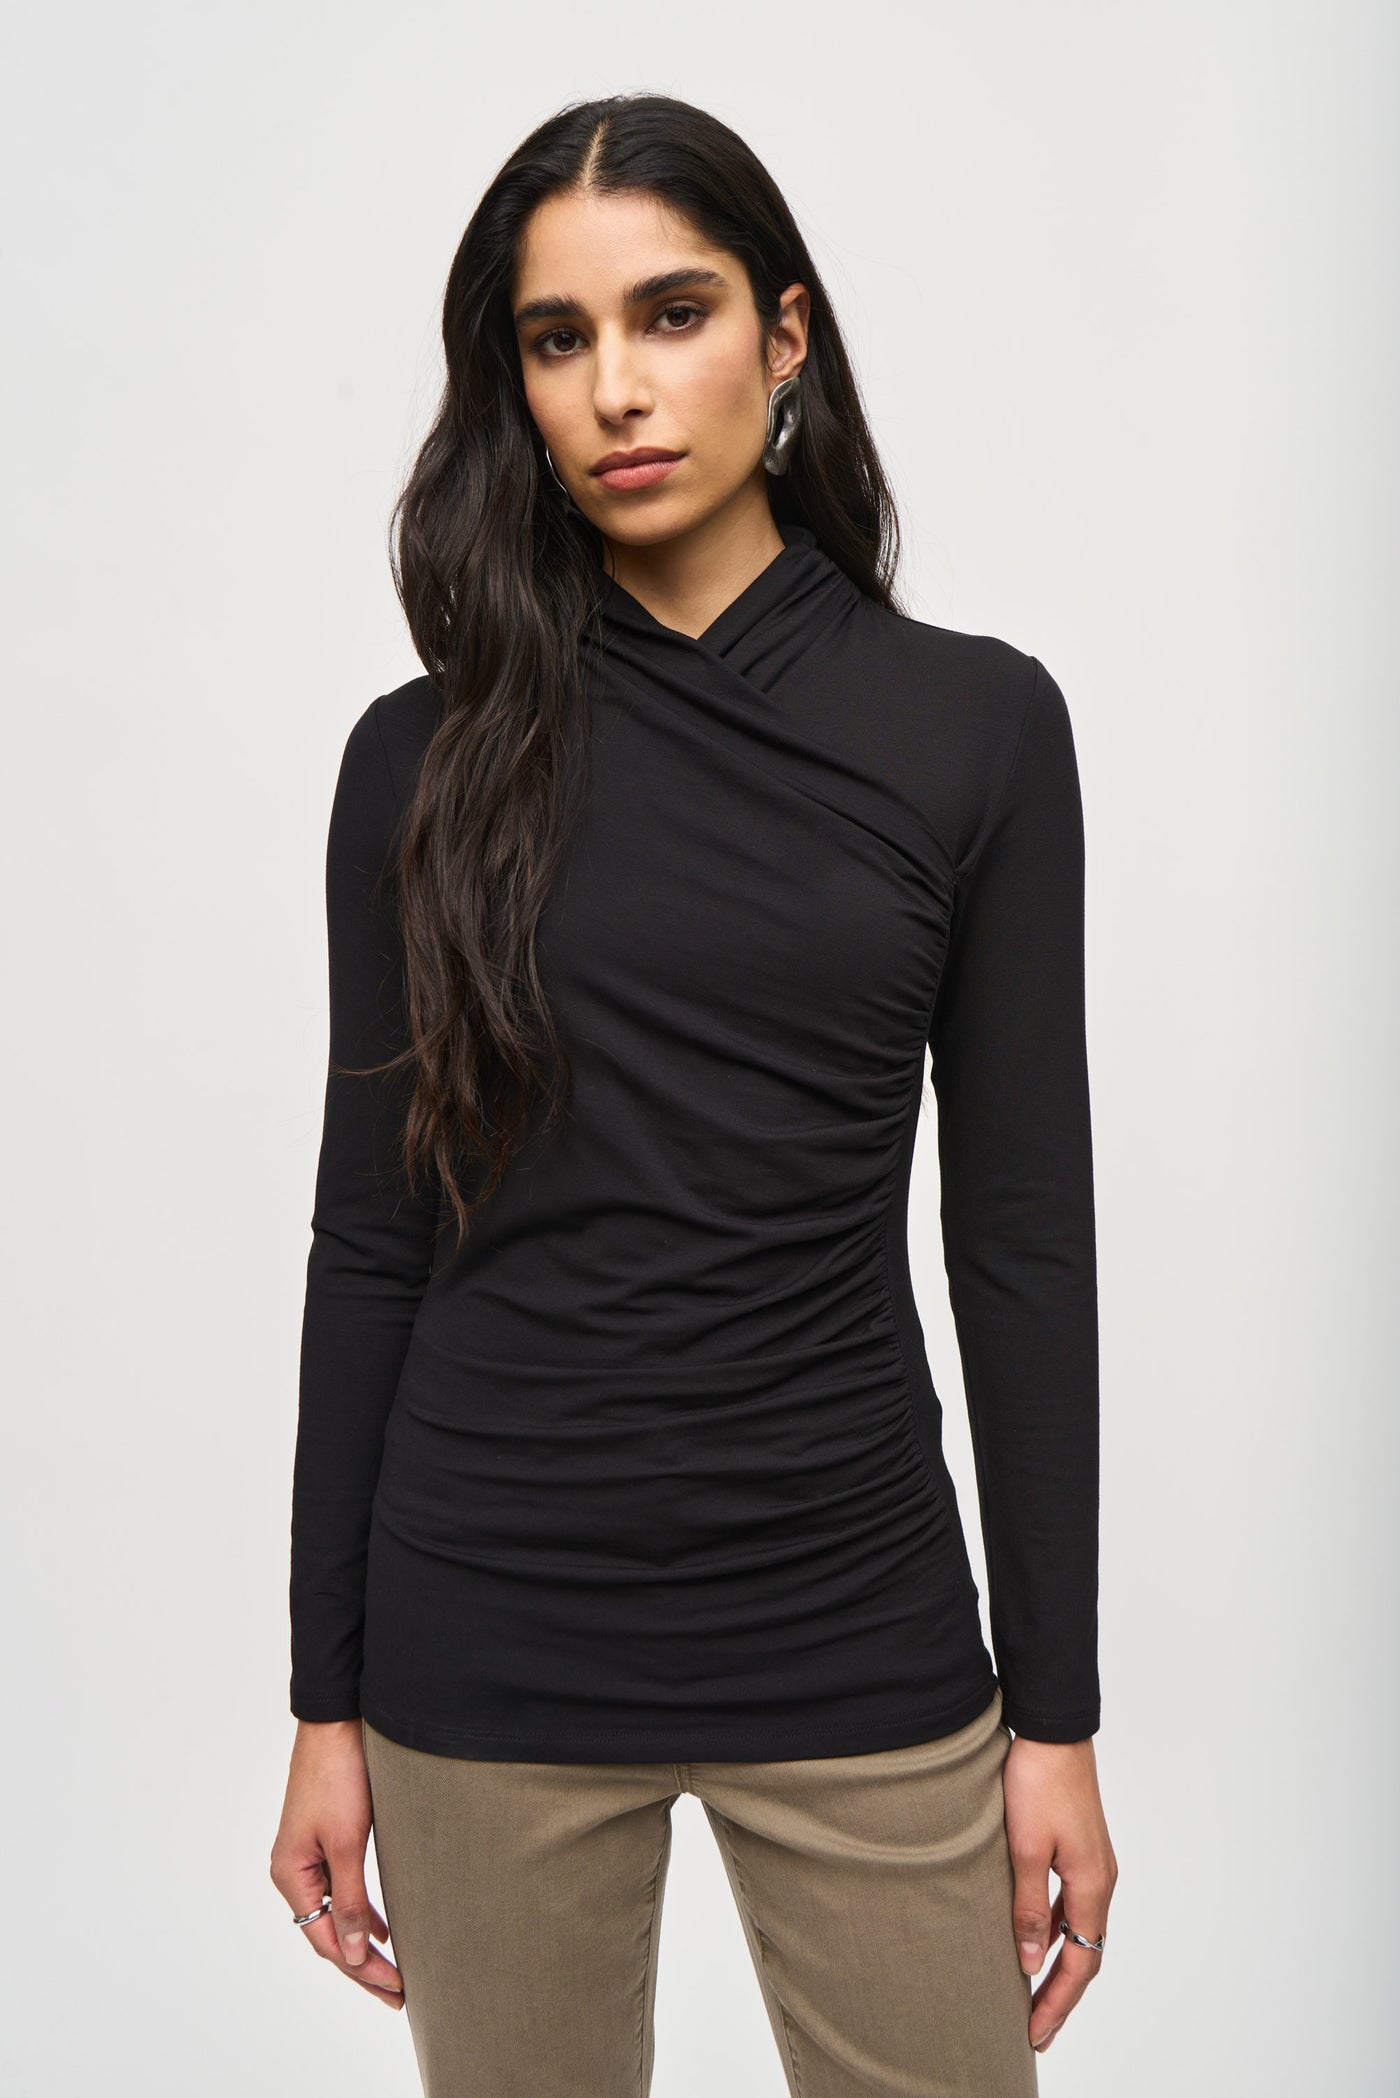 Jersey Knit Fitted Top Joseph Ribkoff